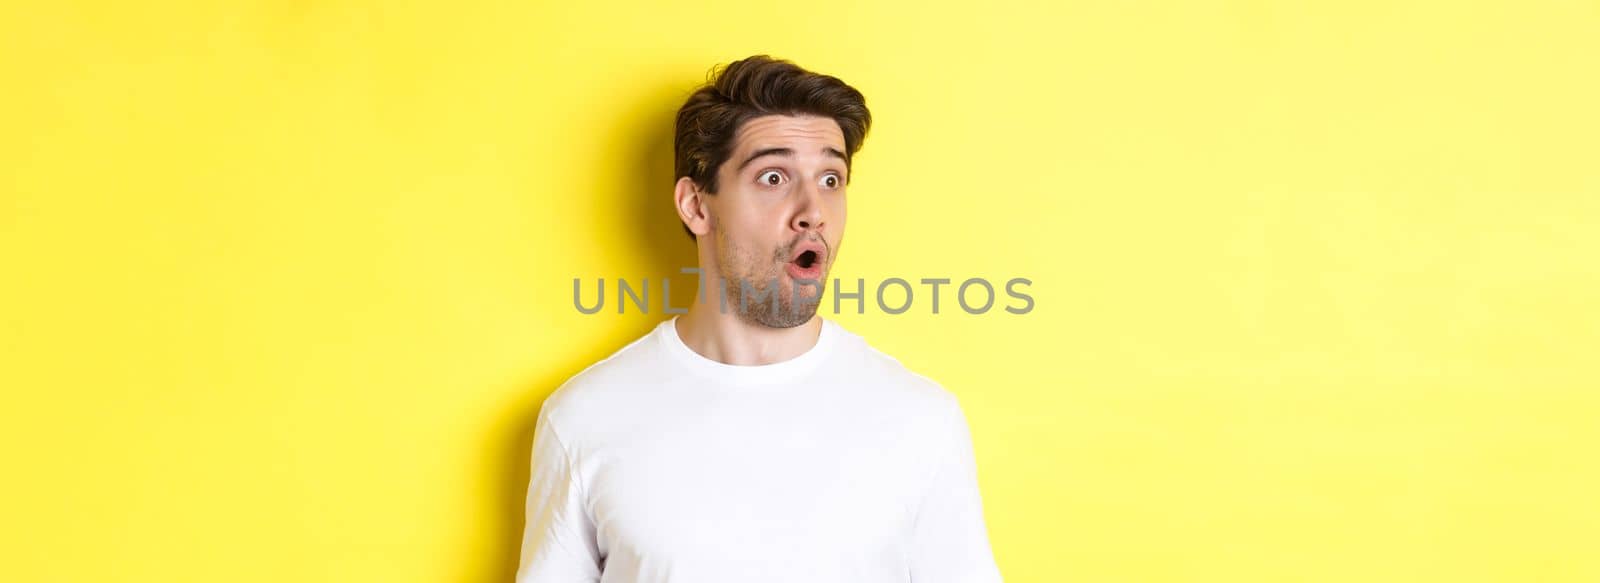 Close-up of impressed man looking left, gasping amazed, standing in white t-shirt against yellow background.